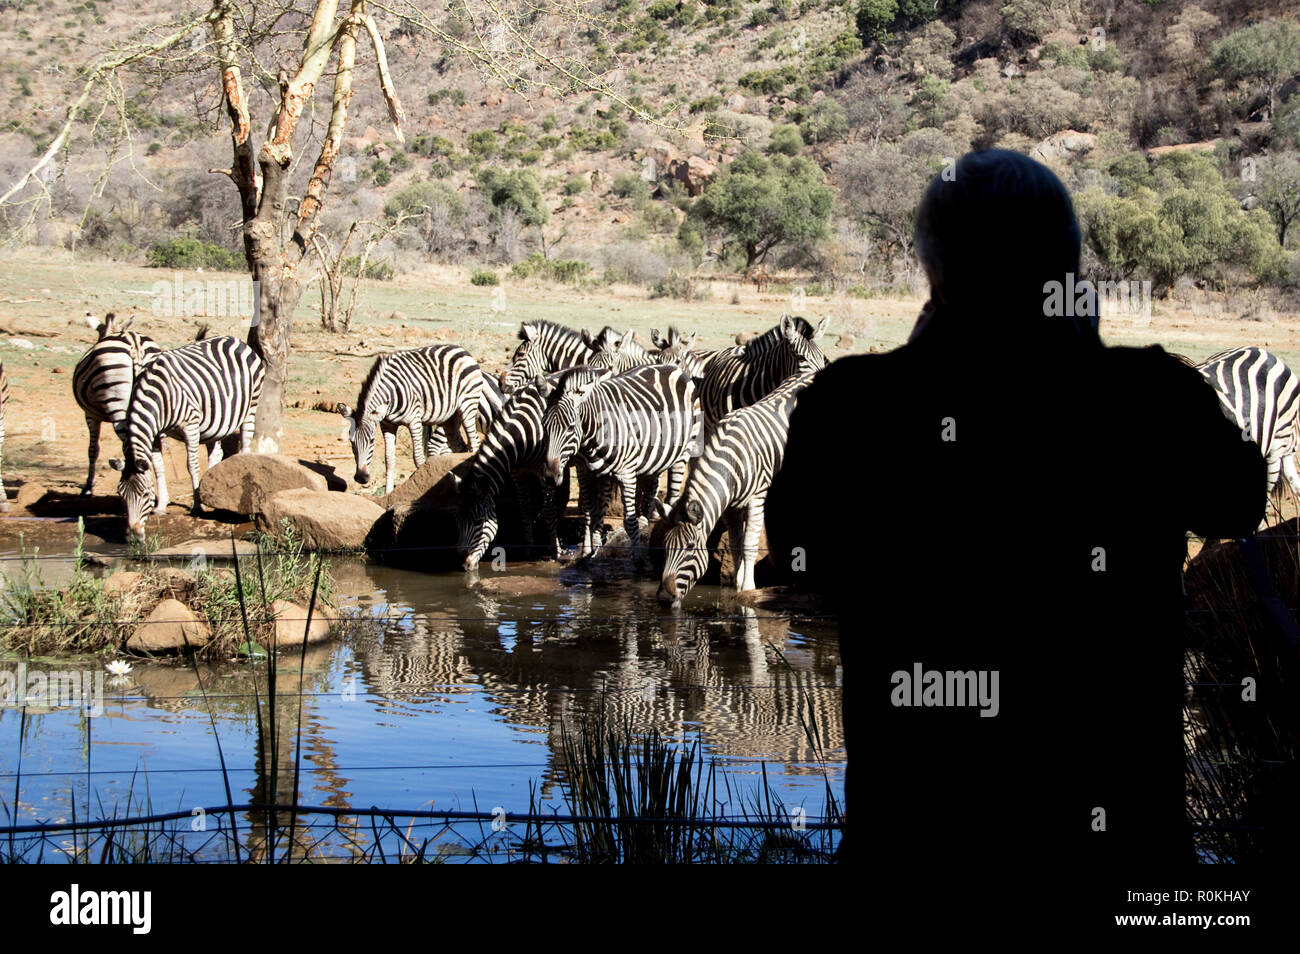 Zebra drinking at a watering hole with silhouette of man in foreground Stock Photo